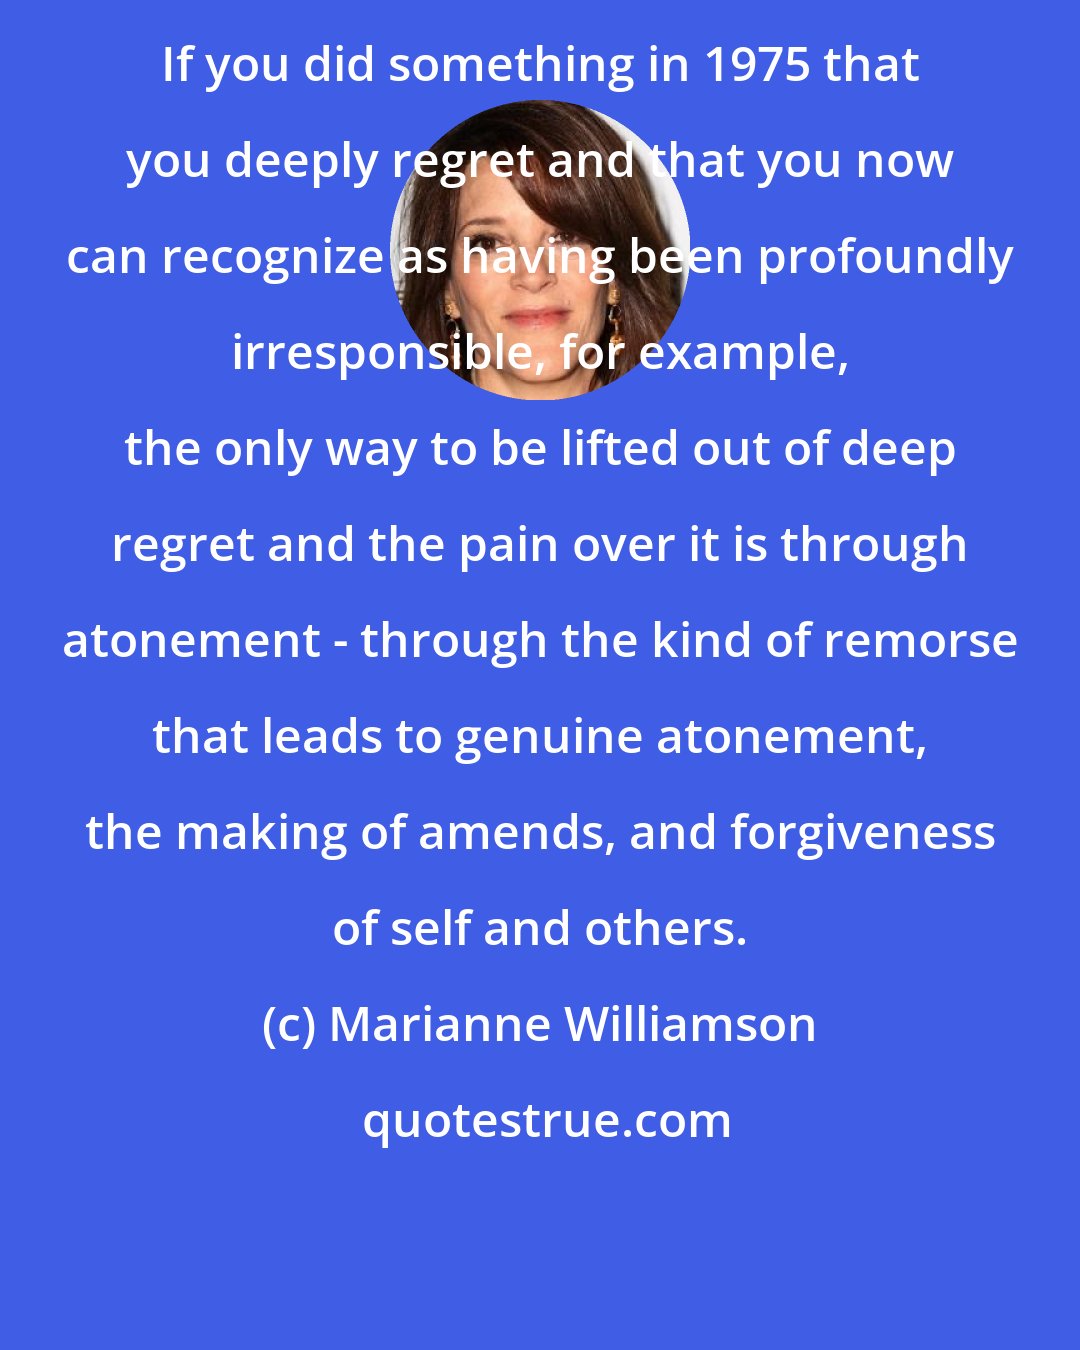 Marianne Williamson: If you did something in 1975 that you deeply regret and that you now can recognize as having been profoundly irresponsible, for example, the only way to be lifted out of deep regret and the pain over it is through atonement - through the kind of remorse that leads to genuine atonement, the making of amends, and forgiveness of self and others.